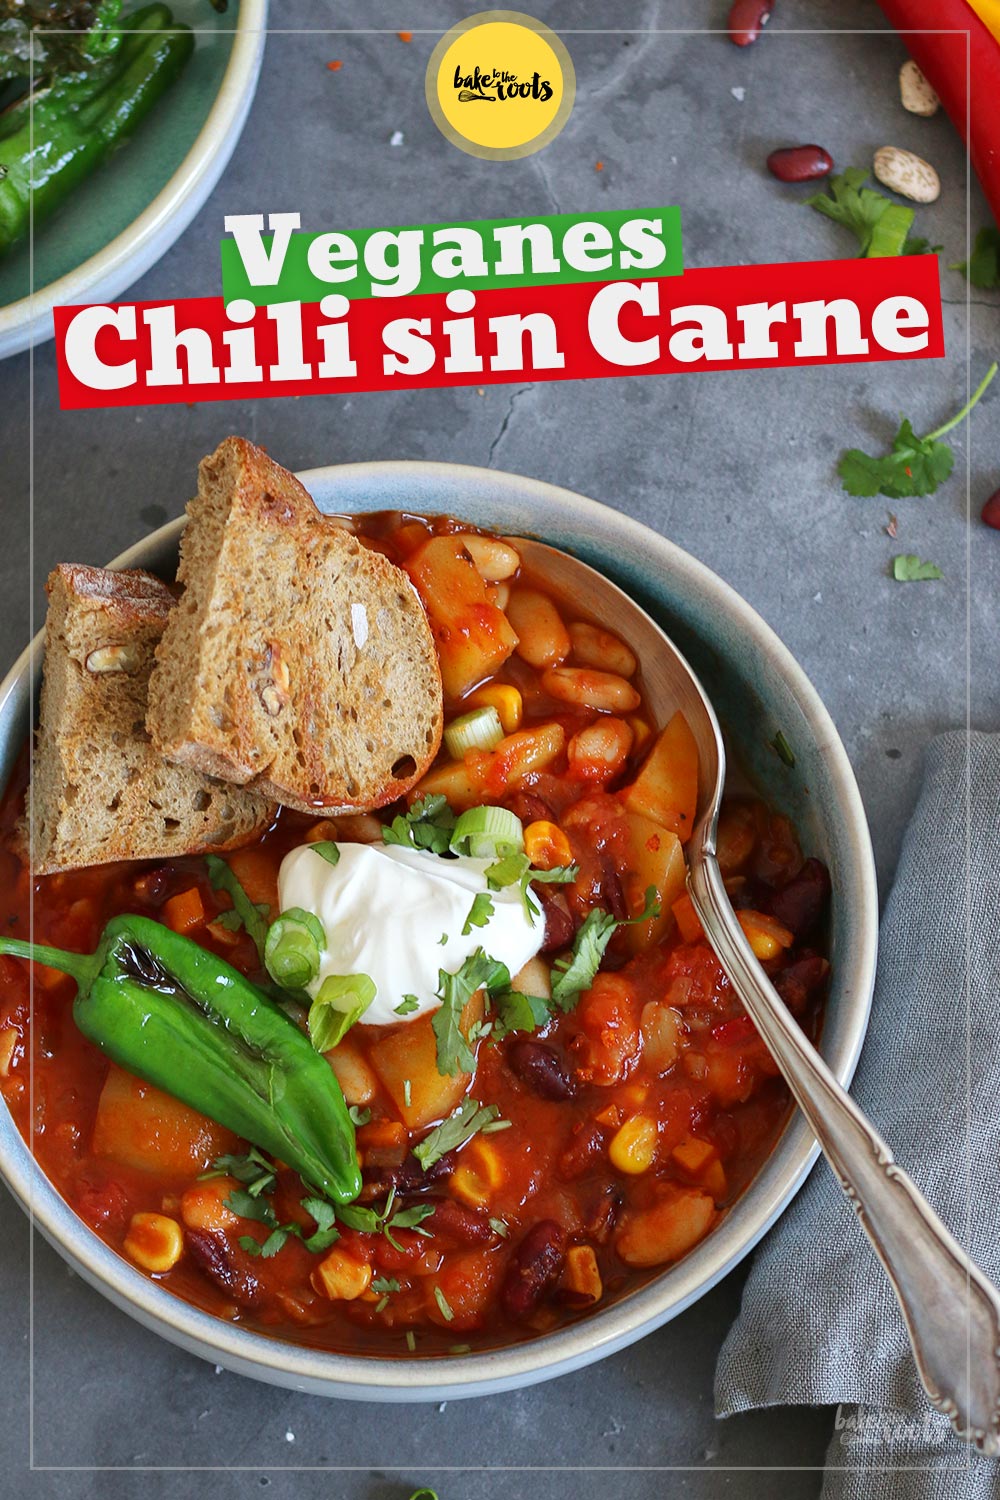 Veganes Chili Sin Carne | Bake to the roots